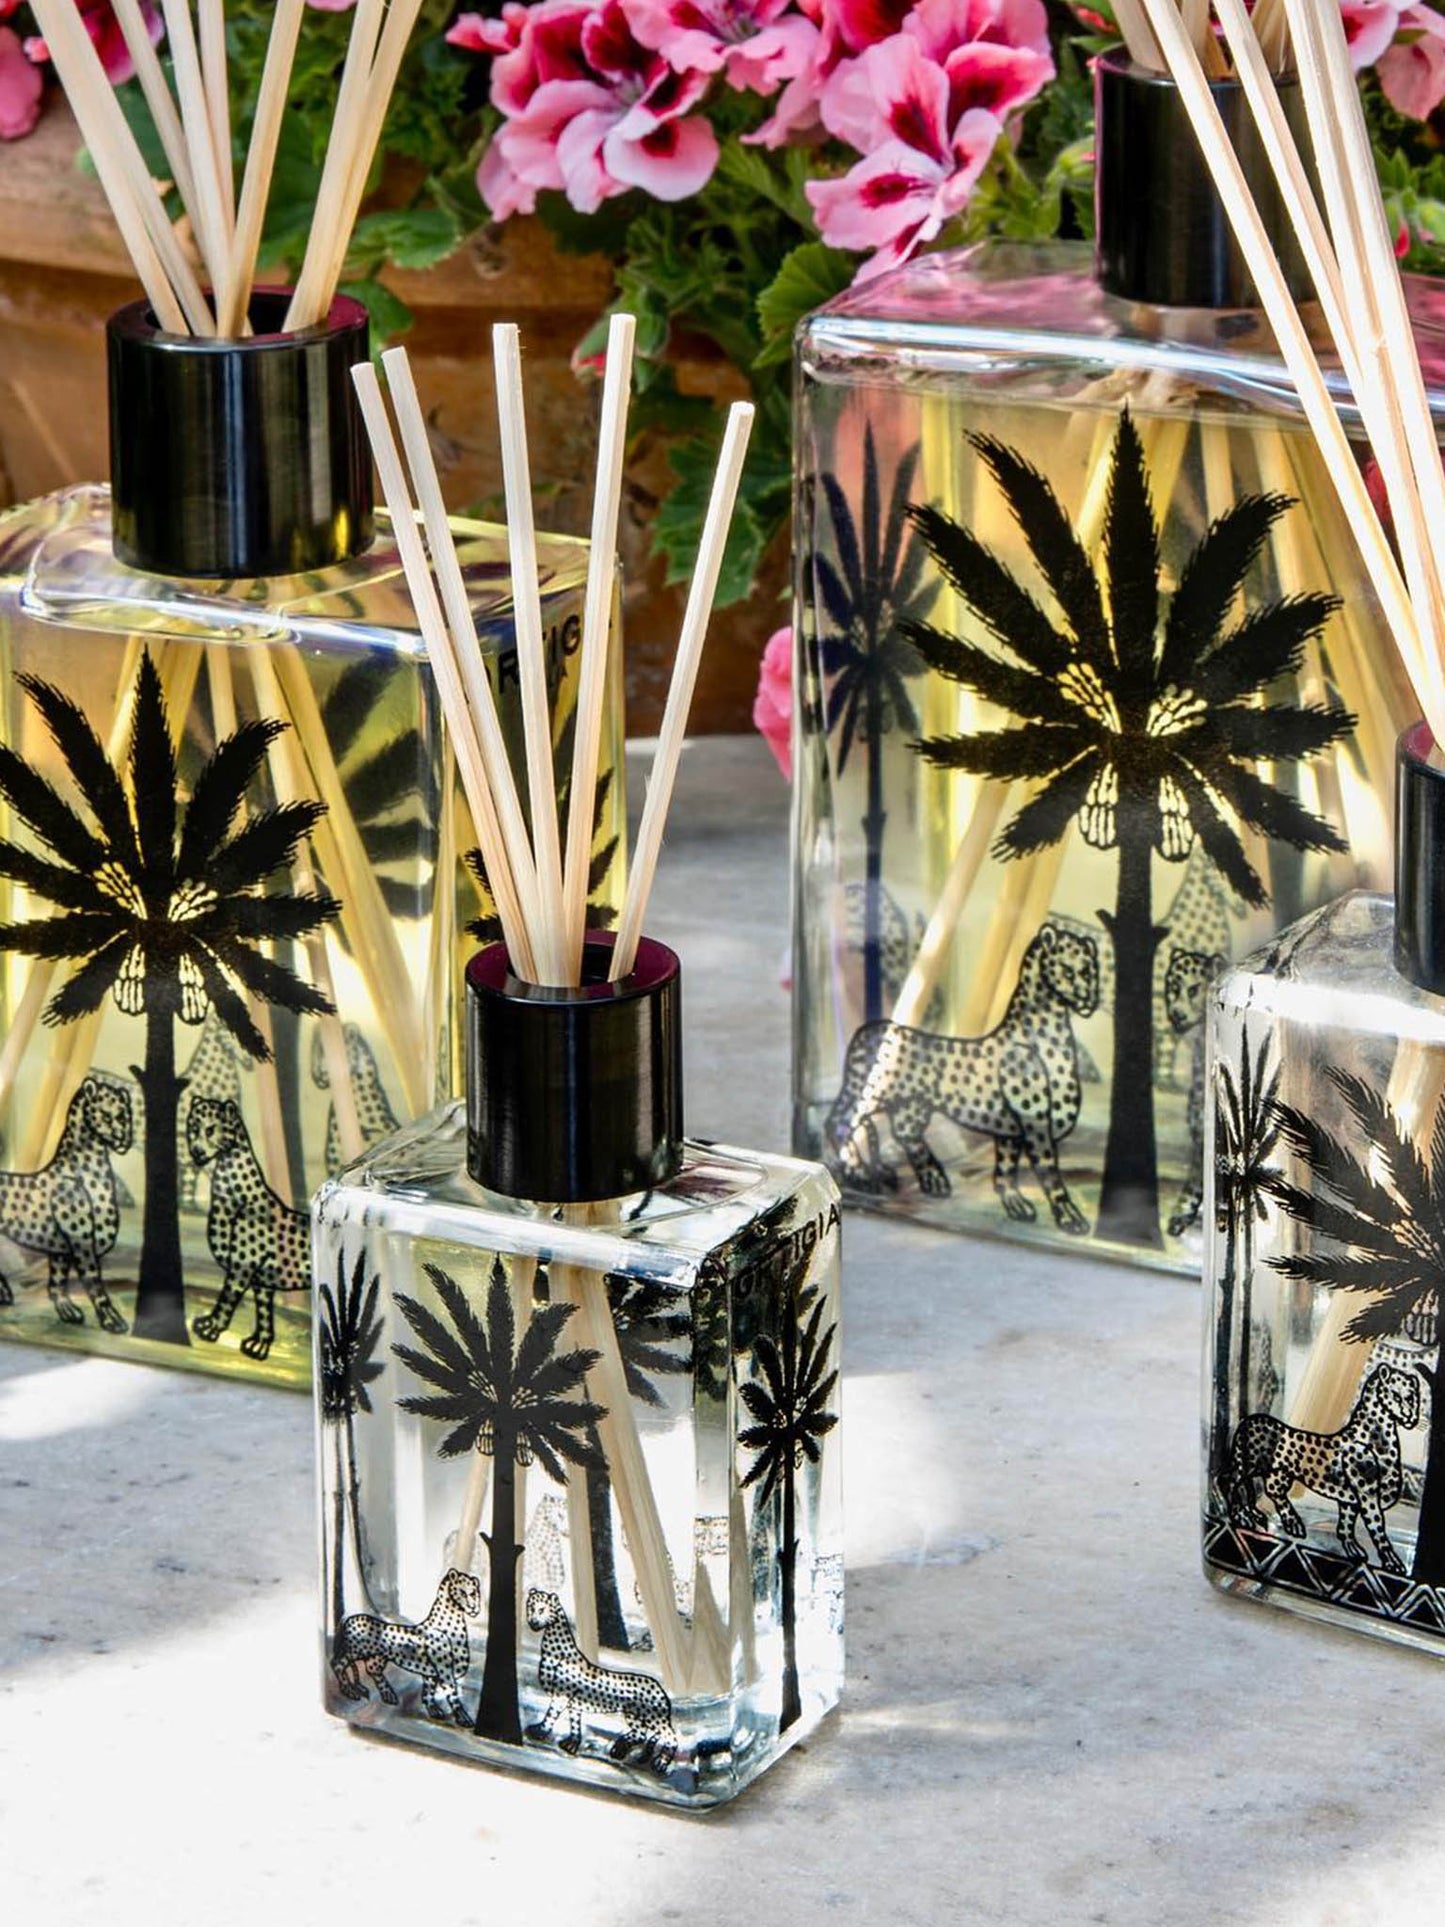 Ortigia Fico Palma Diffusers Collection lined up on table in front of flowers